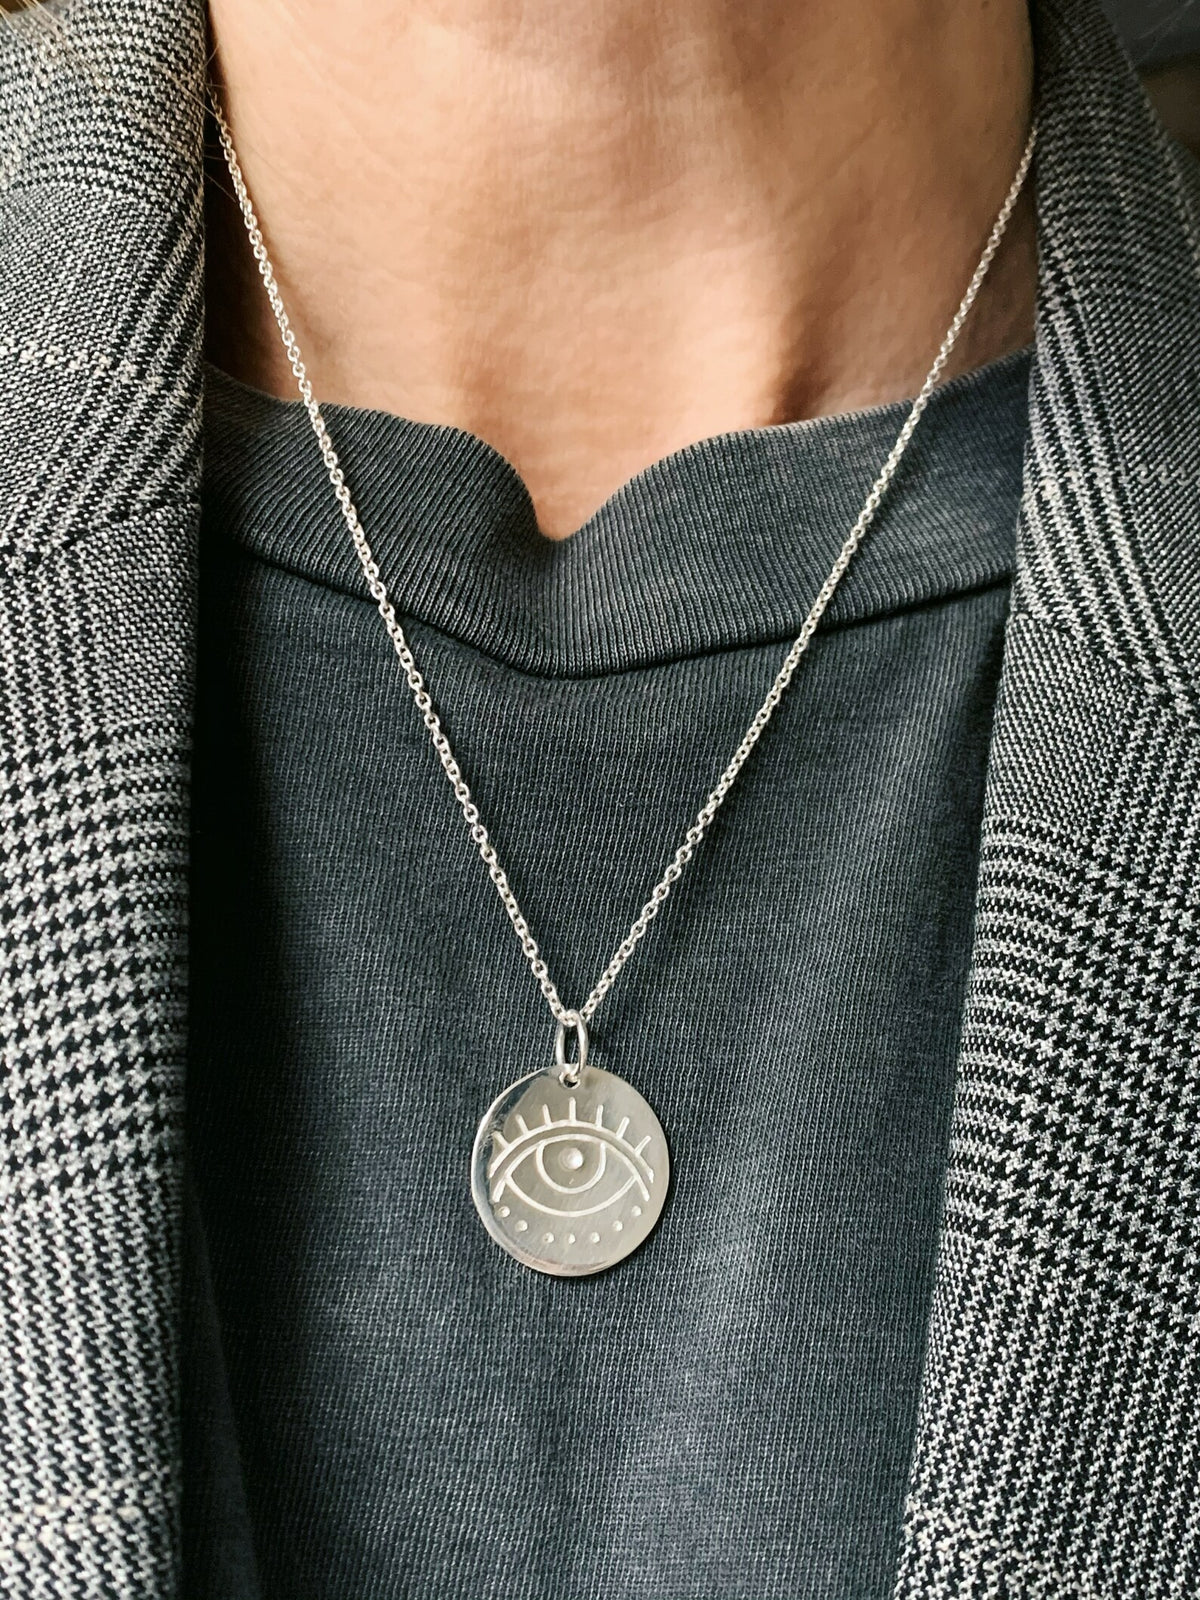 Sterling Silver Coin Necklace, Tiny Silver Medallion Necklace for